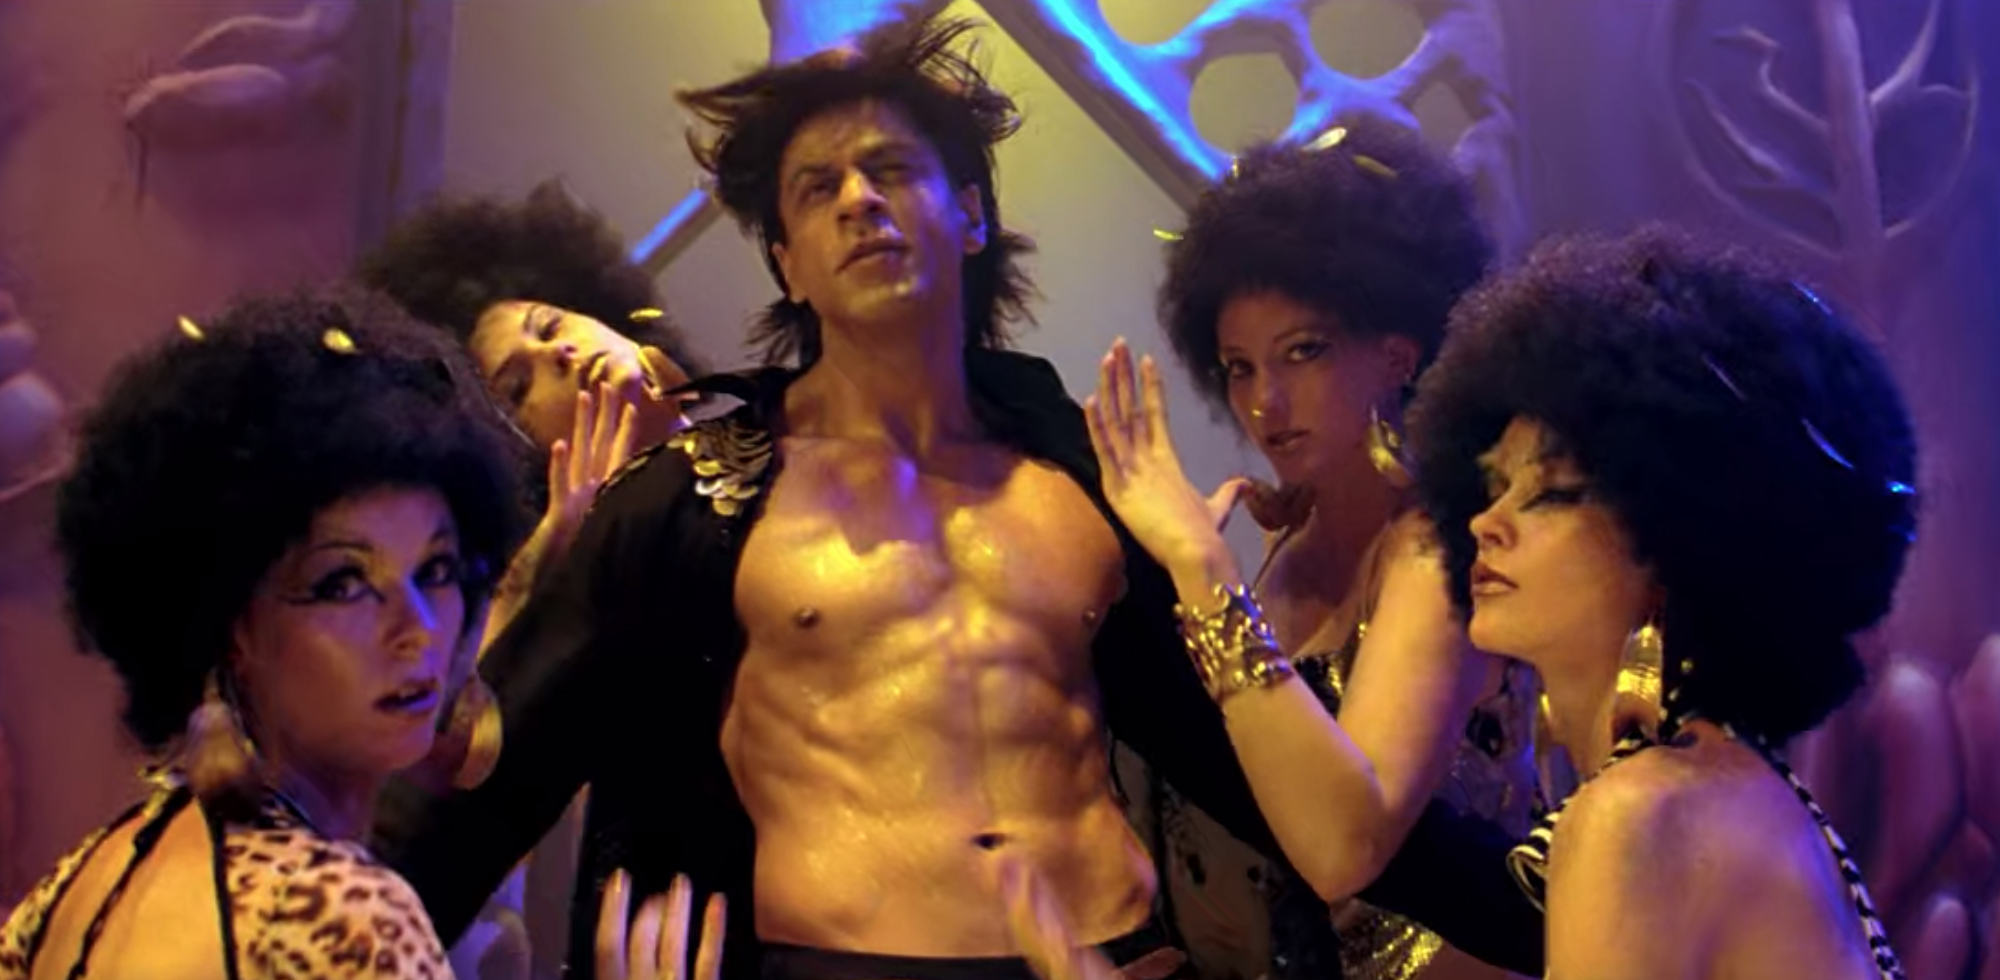 Om, shirtless and bathed in golden light, is surrounded by women with afros in cheetah costumes.